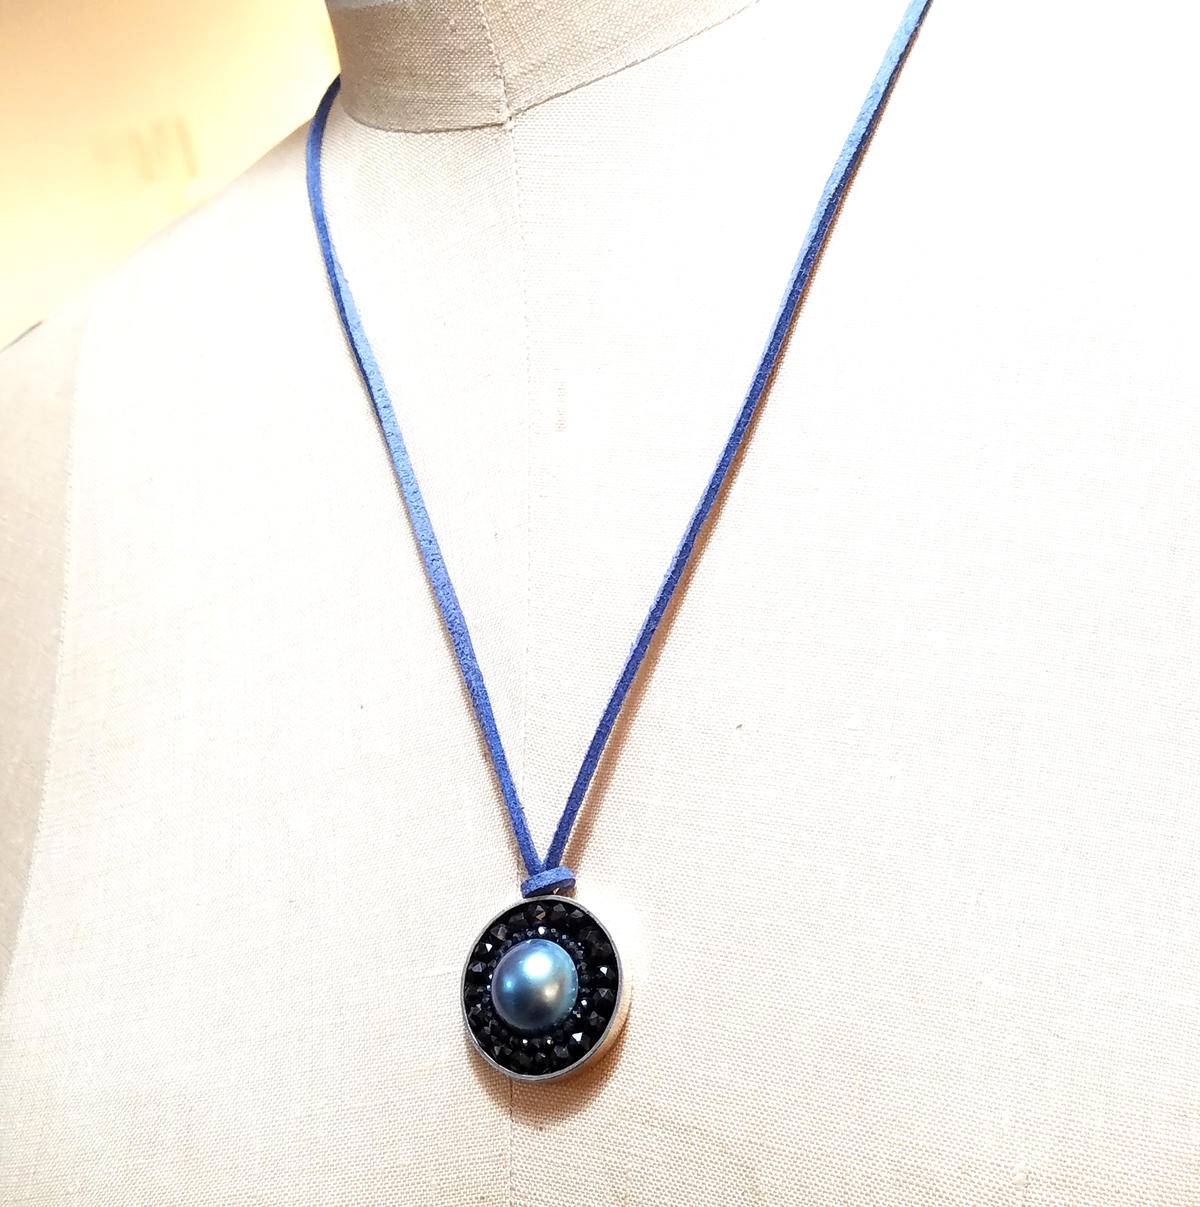 Iconic Mosaic Necklace of Peacock Mave Pearl Surrounded by Black Sapphire, 22mm, on Greek Leather, 42"